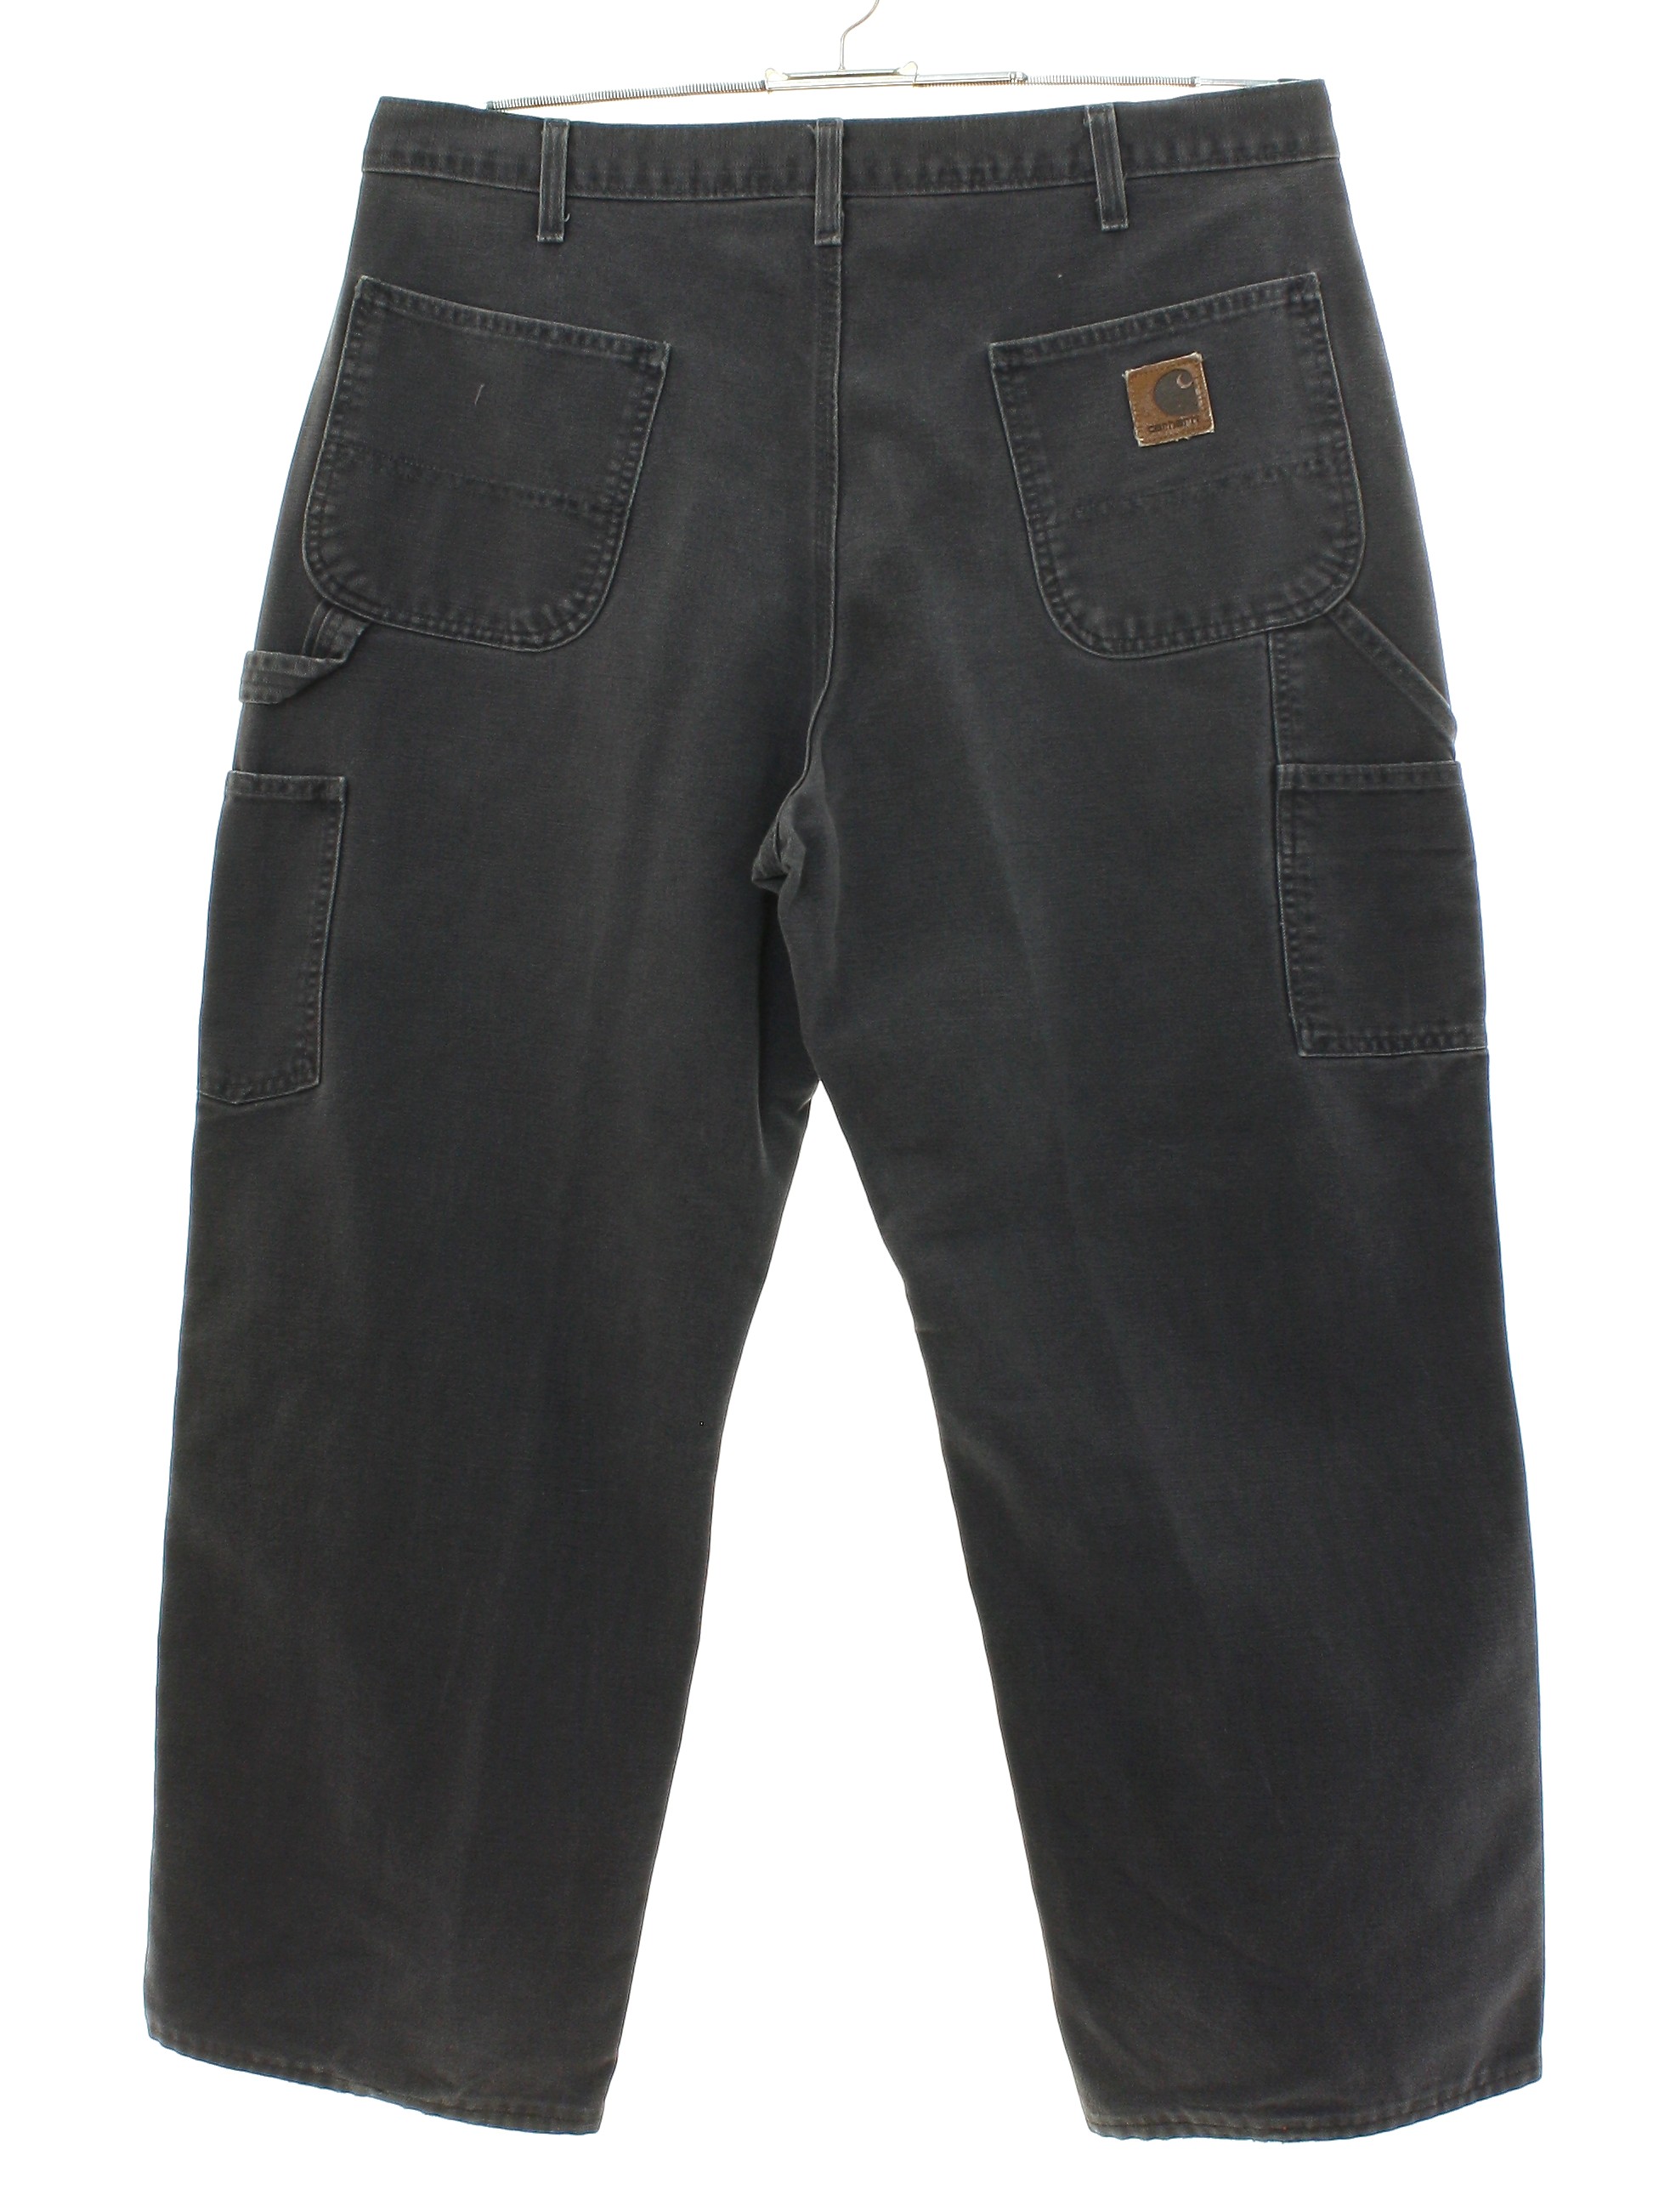 Vintage 90s Pants: Early 90s -Carhartt- Mens charcoal solid colored ...